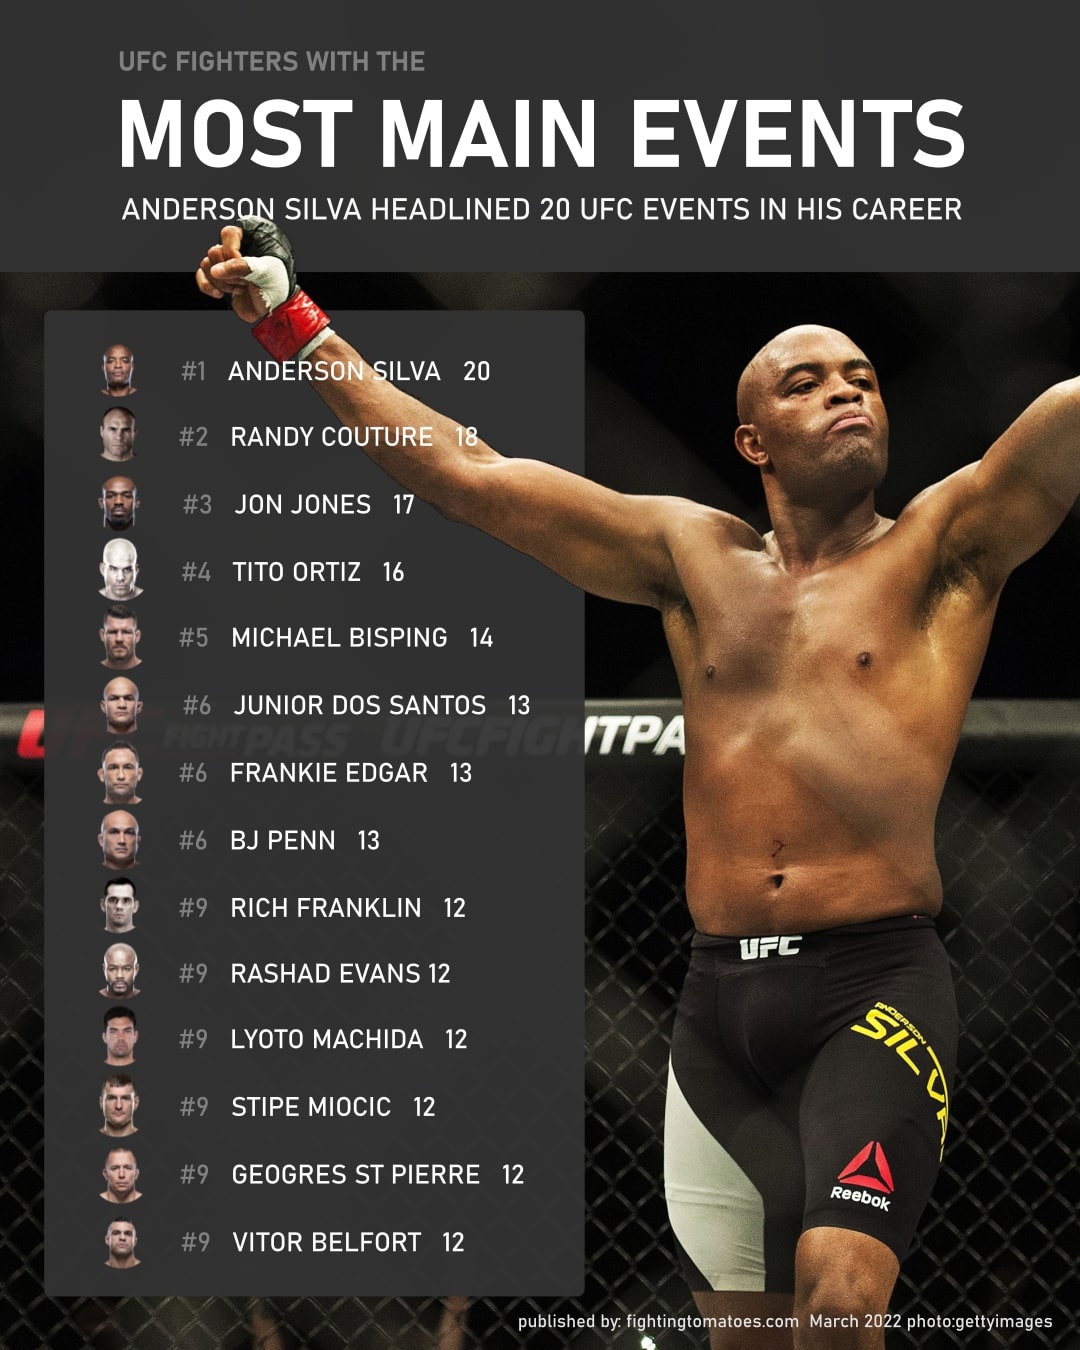 UFC Fighters with the Most Main Events